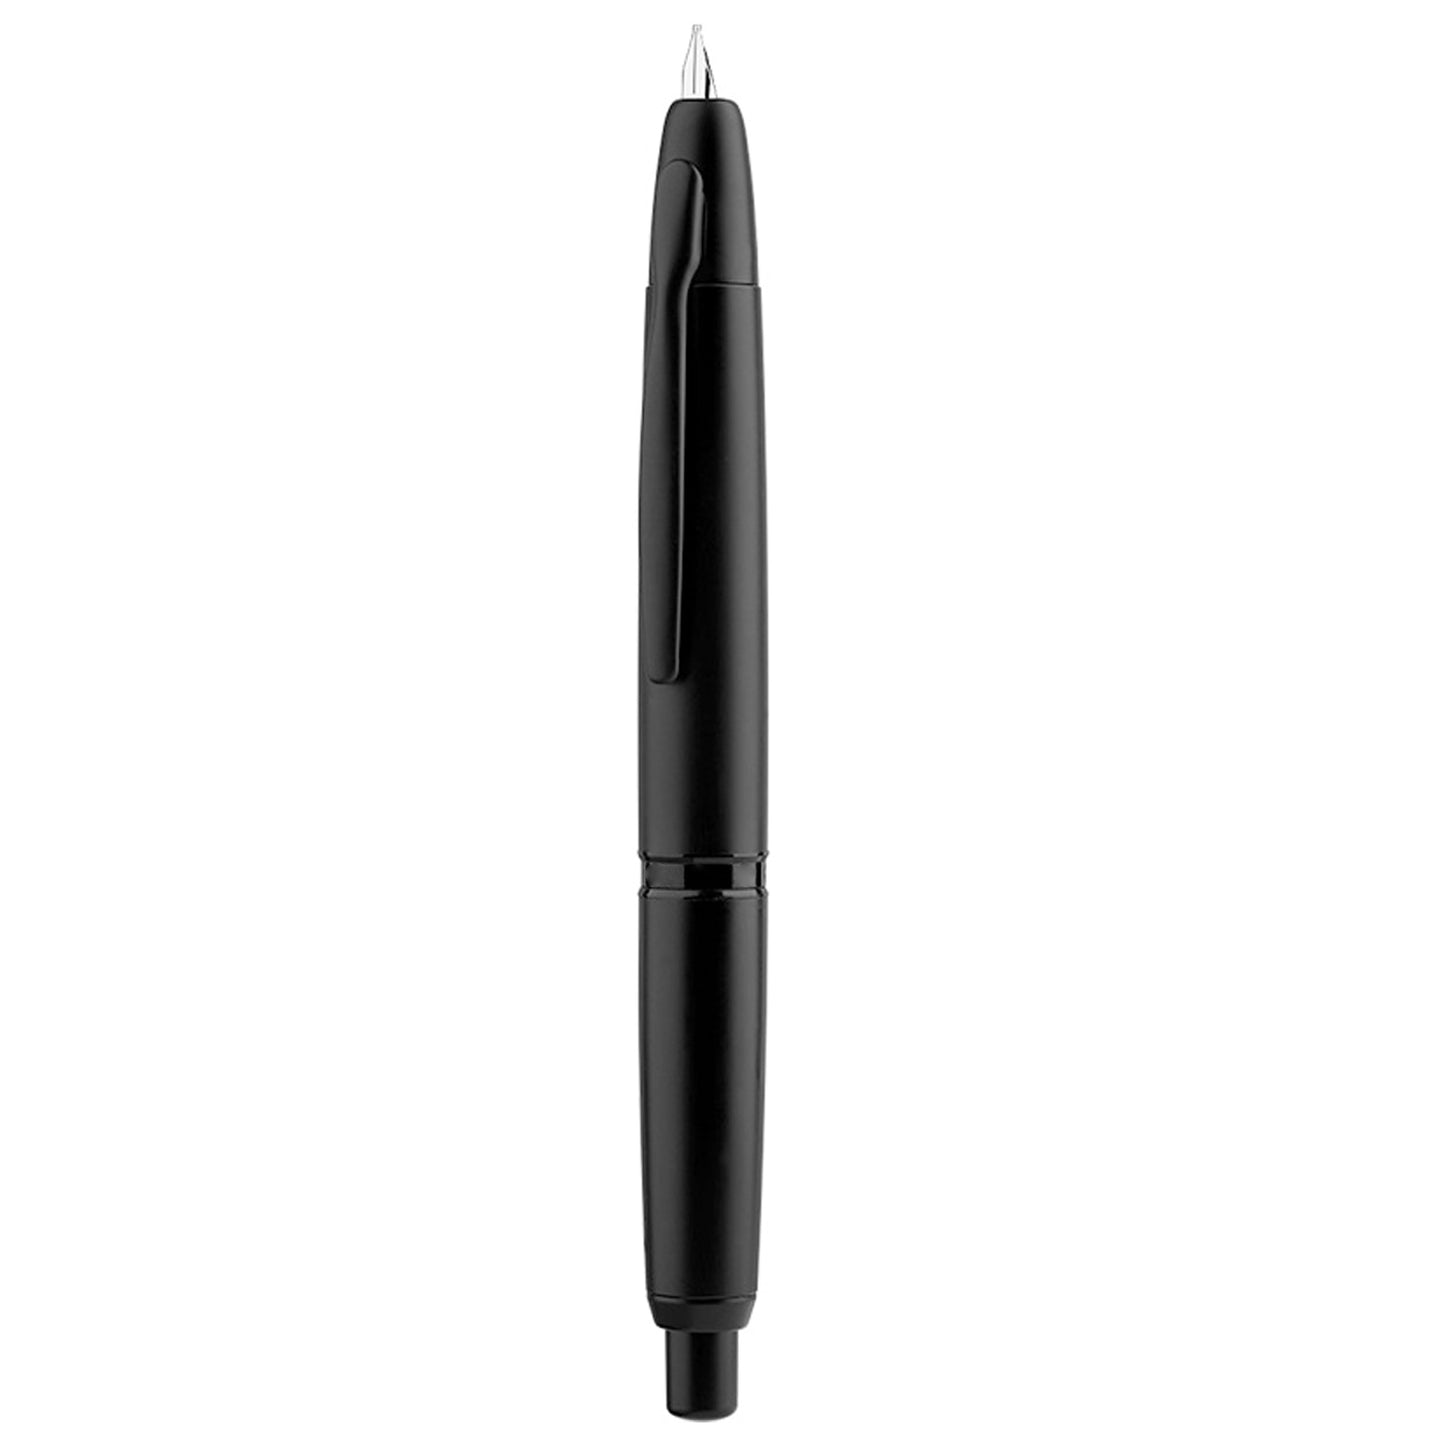 New MAJOHN A1 Press Fountain Pen Retractable Extra Fine Nib 0.4mm Metal Matte Black Ink Pen with Converter for Writing